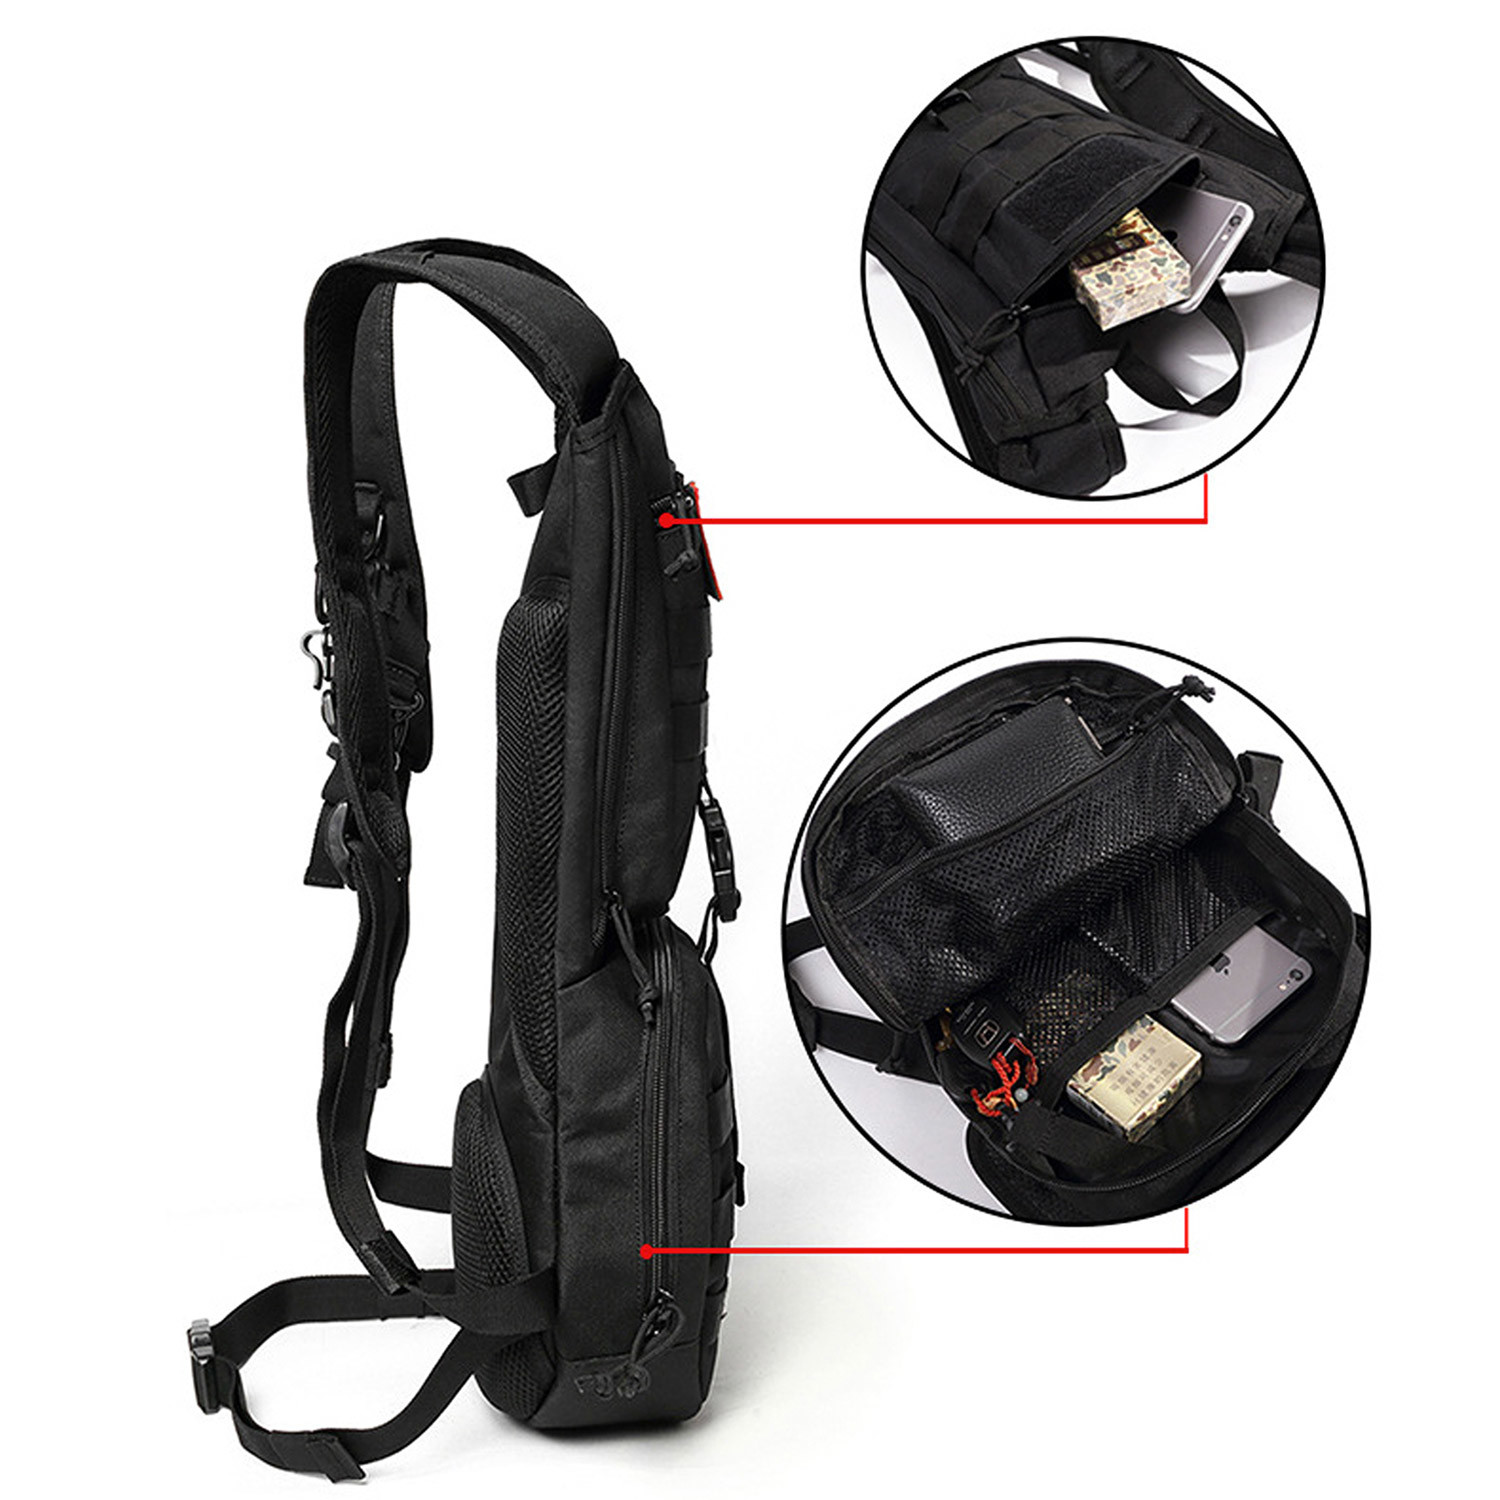 Hydration BackPack (Black) - Invictus Edge - Touch of Modern